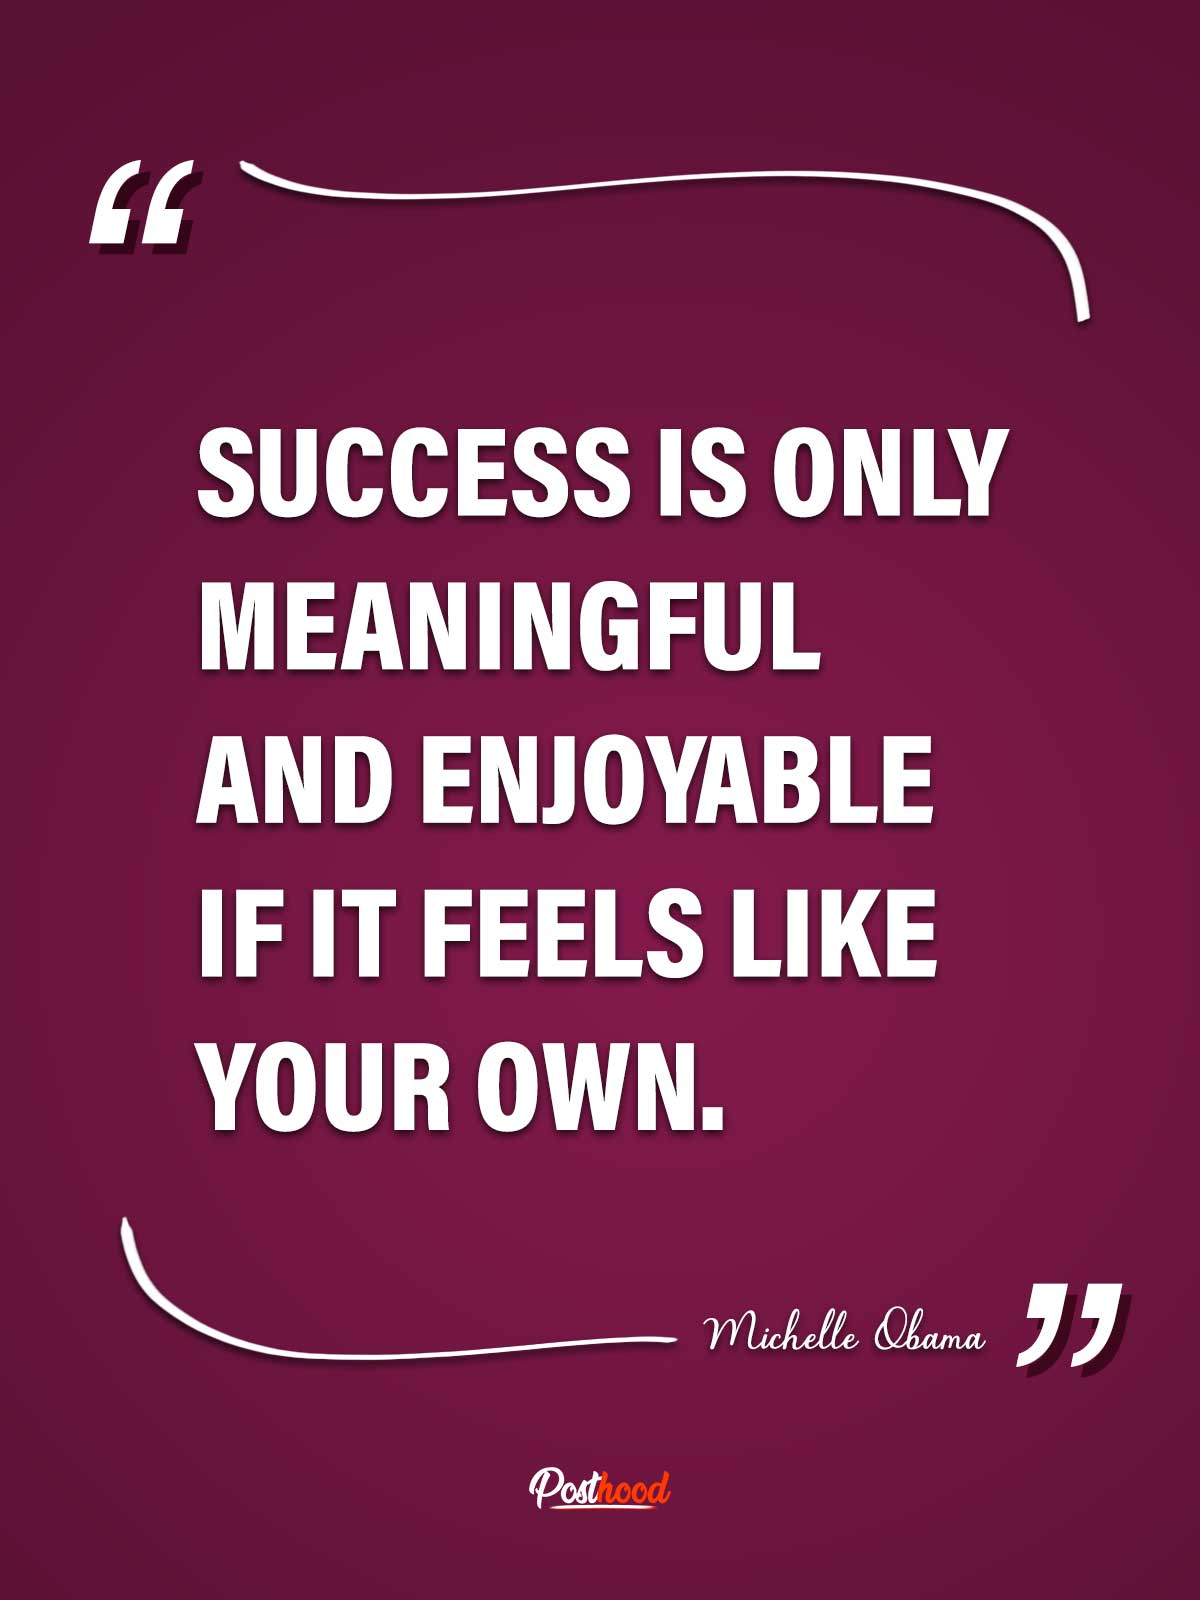 Success quotes by Michelle Obama that will inspire you keep going for your goals. Enjoy Michelle Obama quotes and sayings on success, leadership and women empowerment.